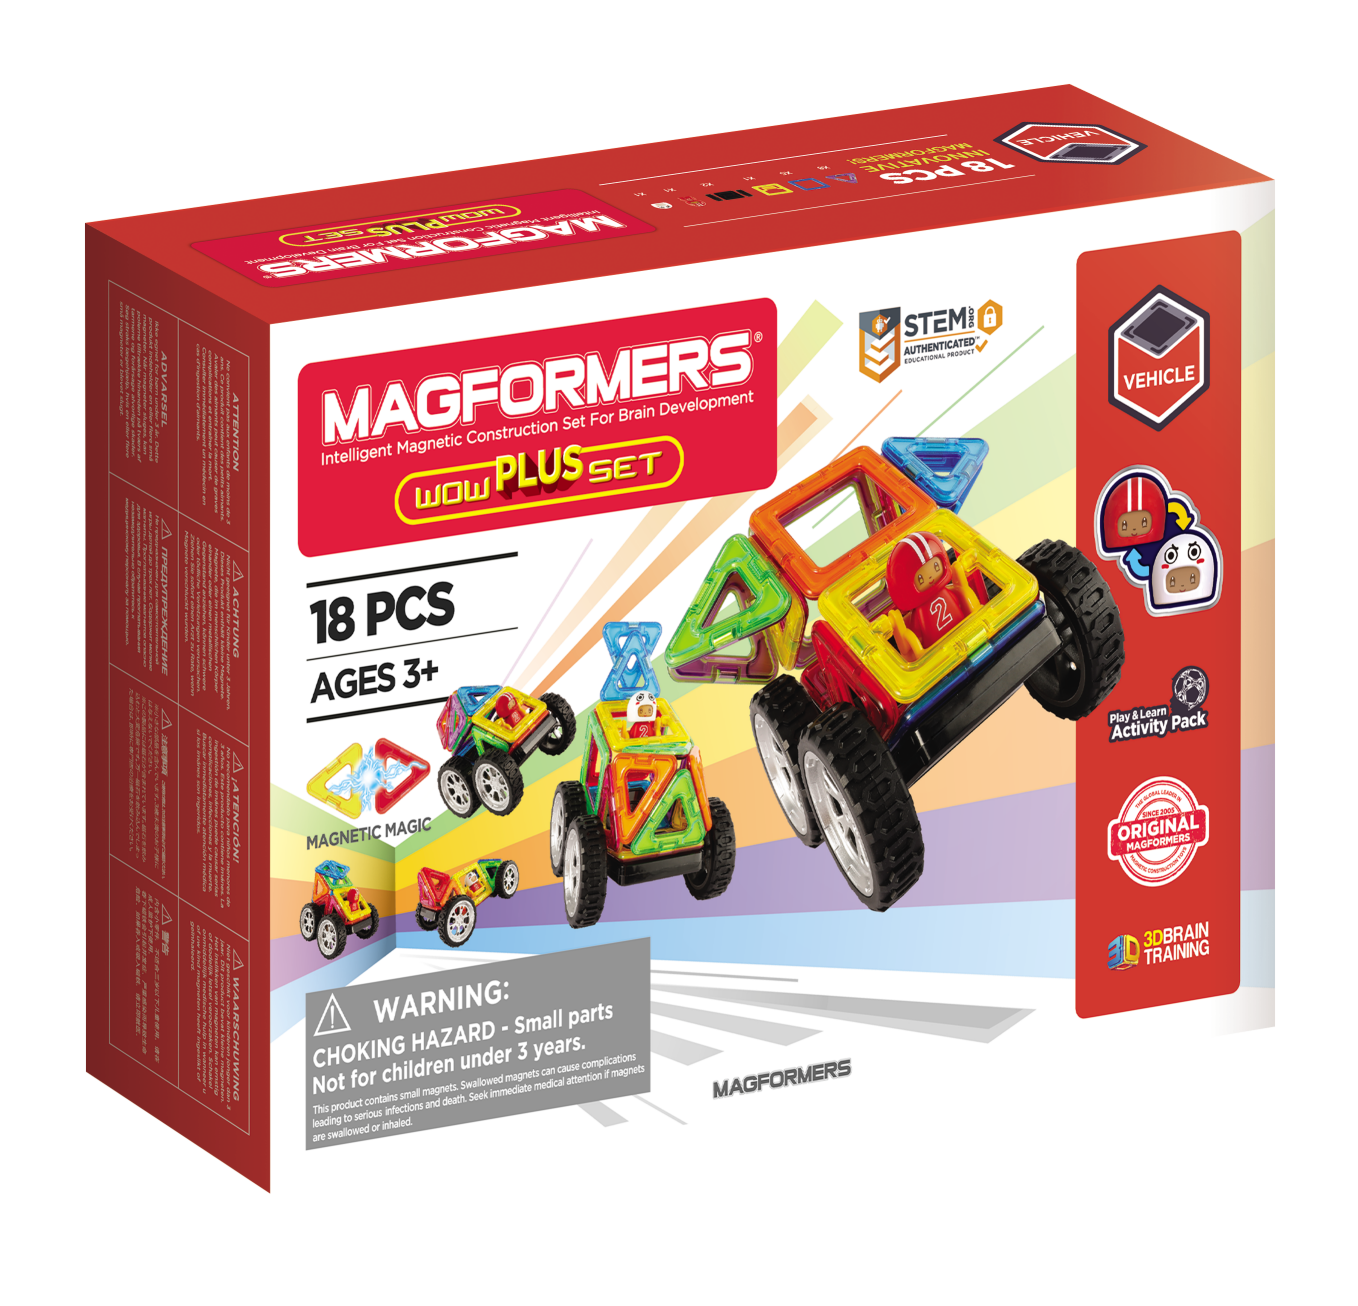 278-95 Magformers Wow Plus Set